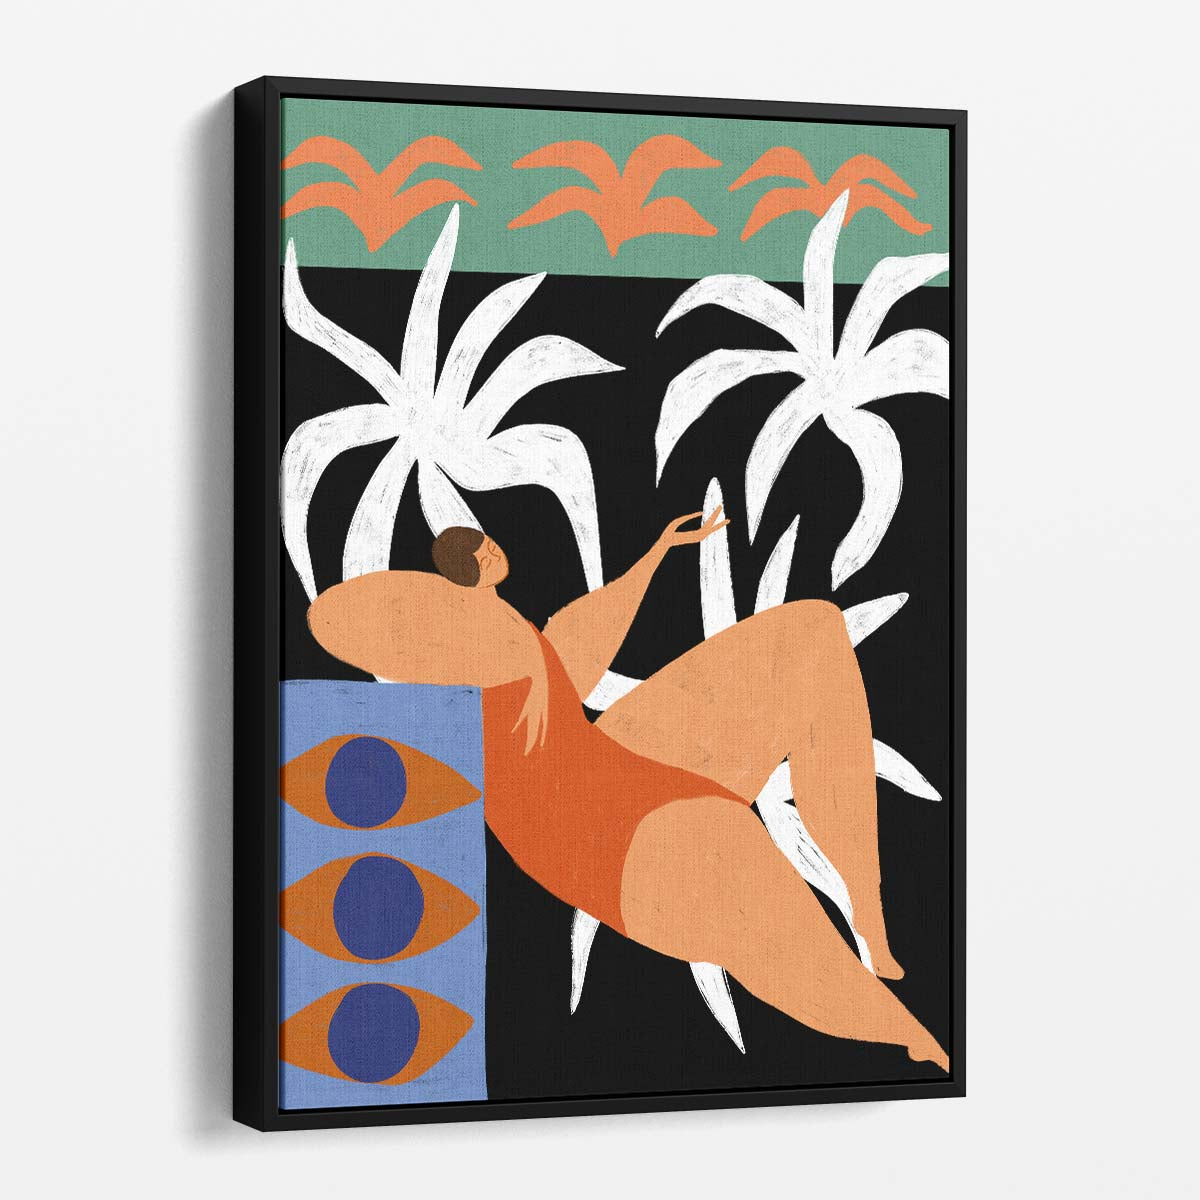 Colorful Abstract Figurative Illustration of Relaxing Woman Amidst Tropical Botanicals by Luxuriance Designs, made in USA